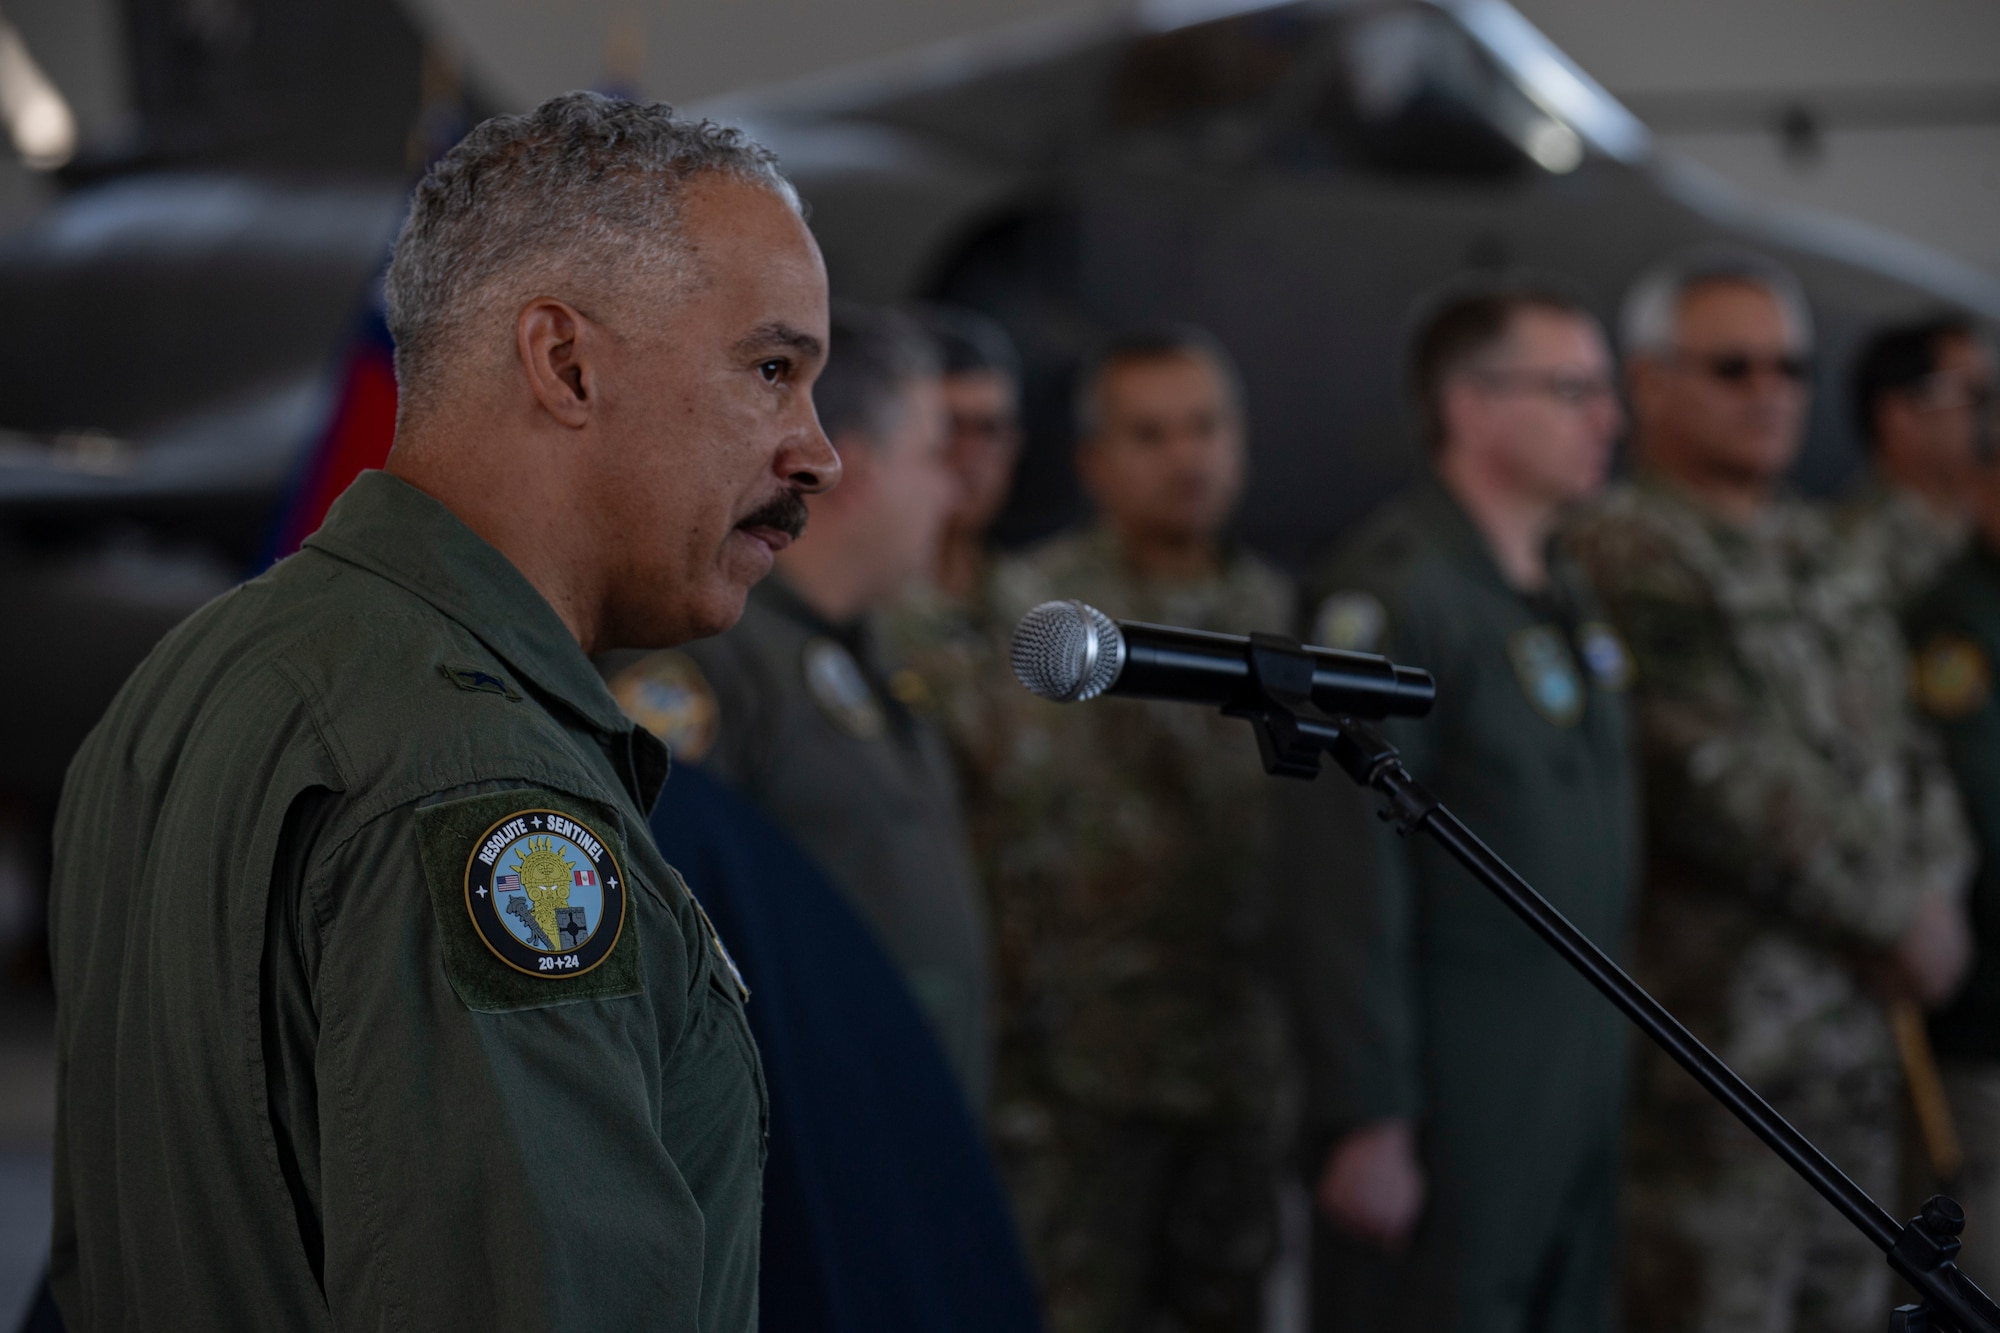 U.S. Air Force Brig. Gen. David Cochran, assistant adjutant general and commander of the West Virginia Air National Guard, delivers remarks at the opening ceremony for Resolute Sentinal 2024 at Grupo 4 in La Joya, Peru, May 27, 2024.